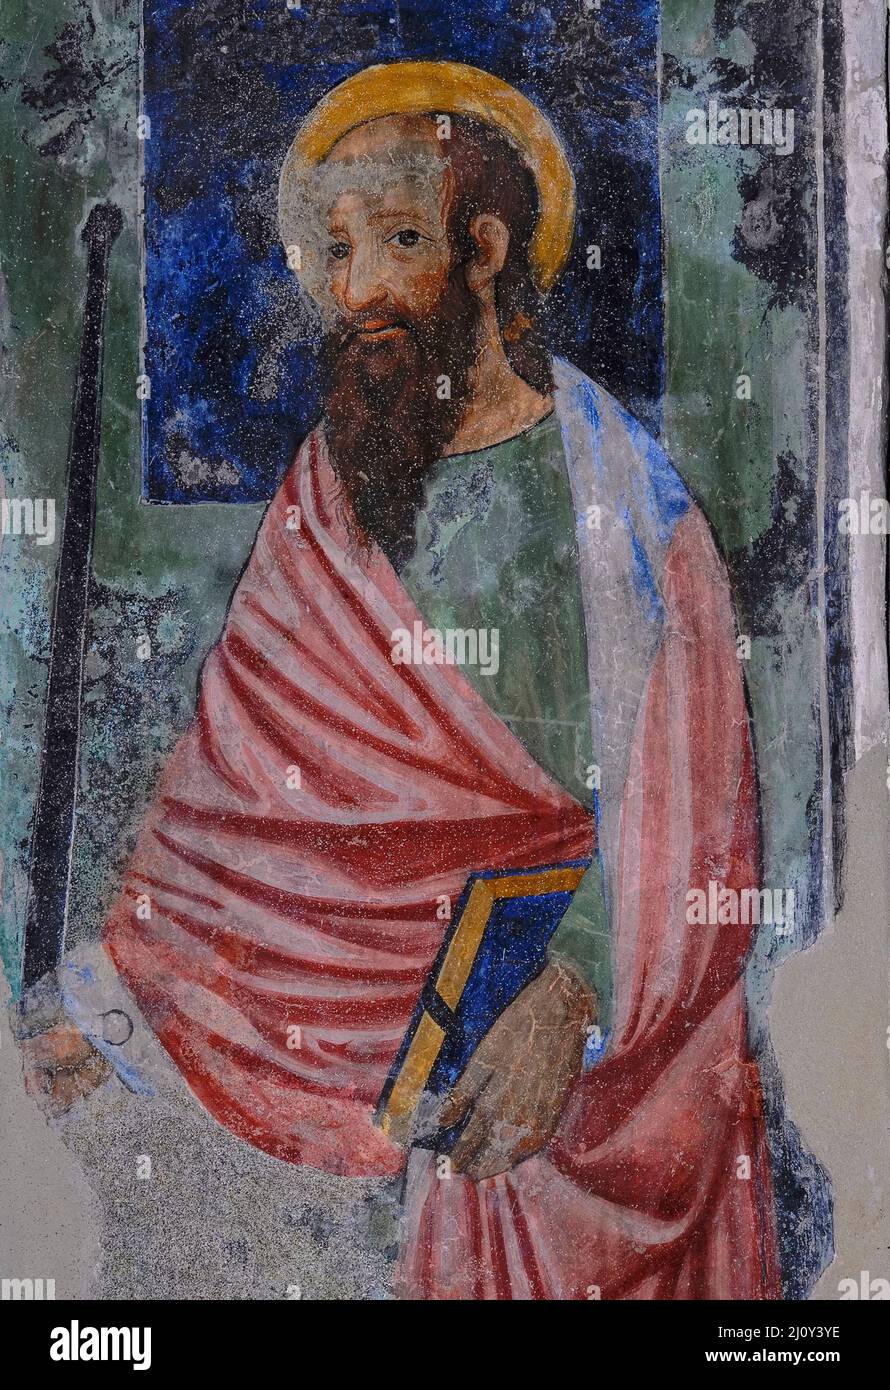 Saint Paul the Apostle, holding a sword and a book, in 1400s Piedmontese Late Gothic fresco cycle.  Immediately below quadripartite ceiling vault in the church of the former Franciscan convent of San Francesco at Susa, Piedmont, Italy. Stock Photo